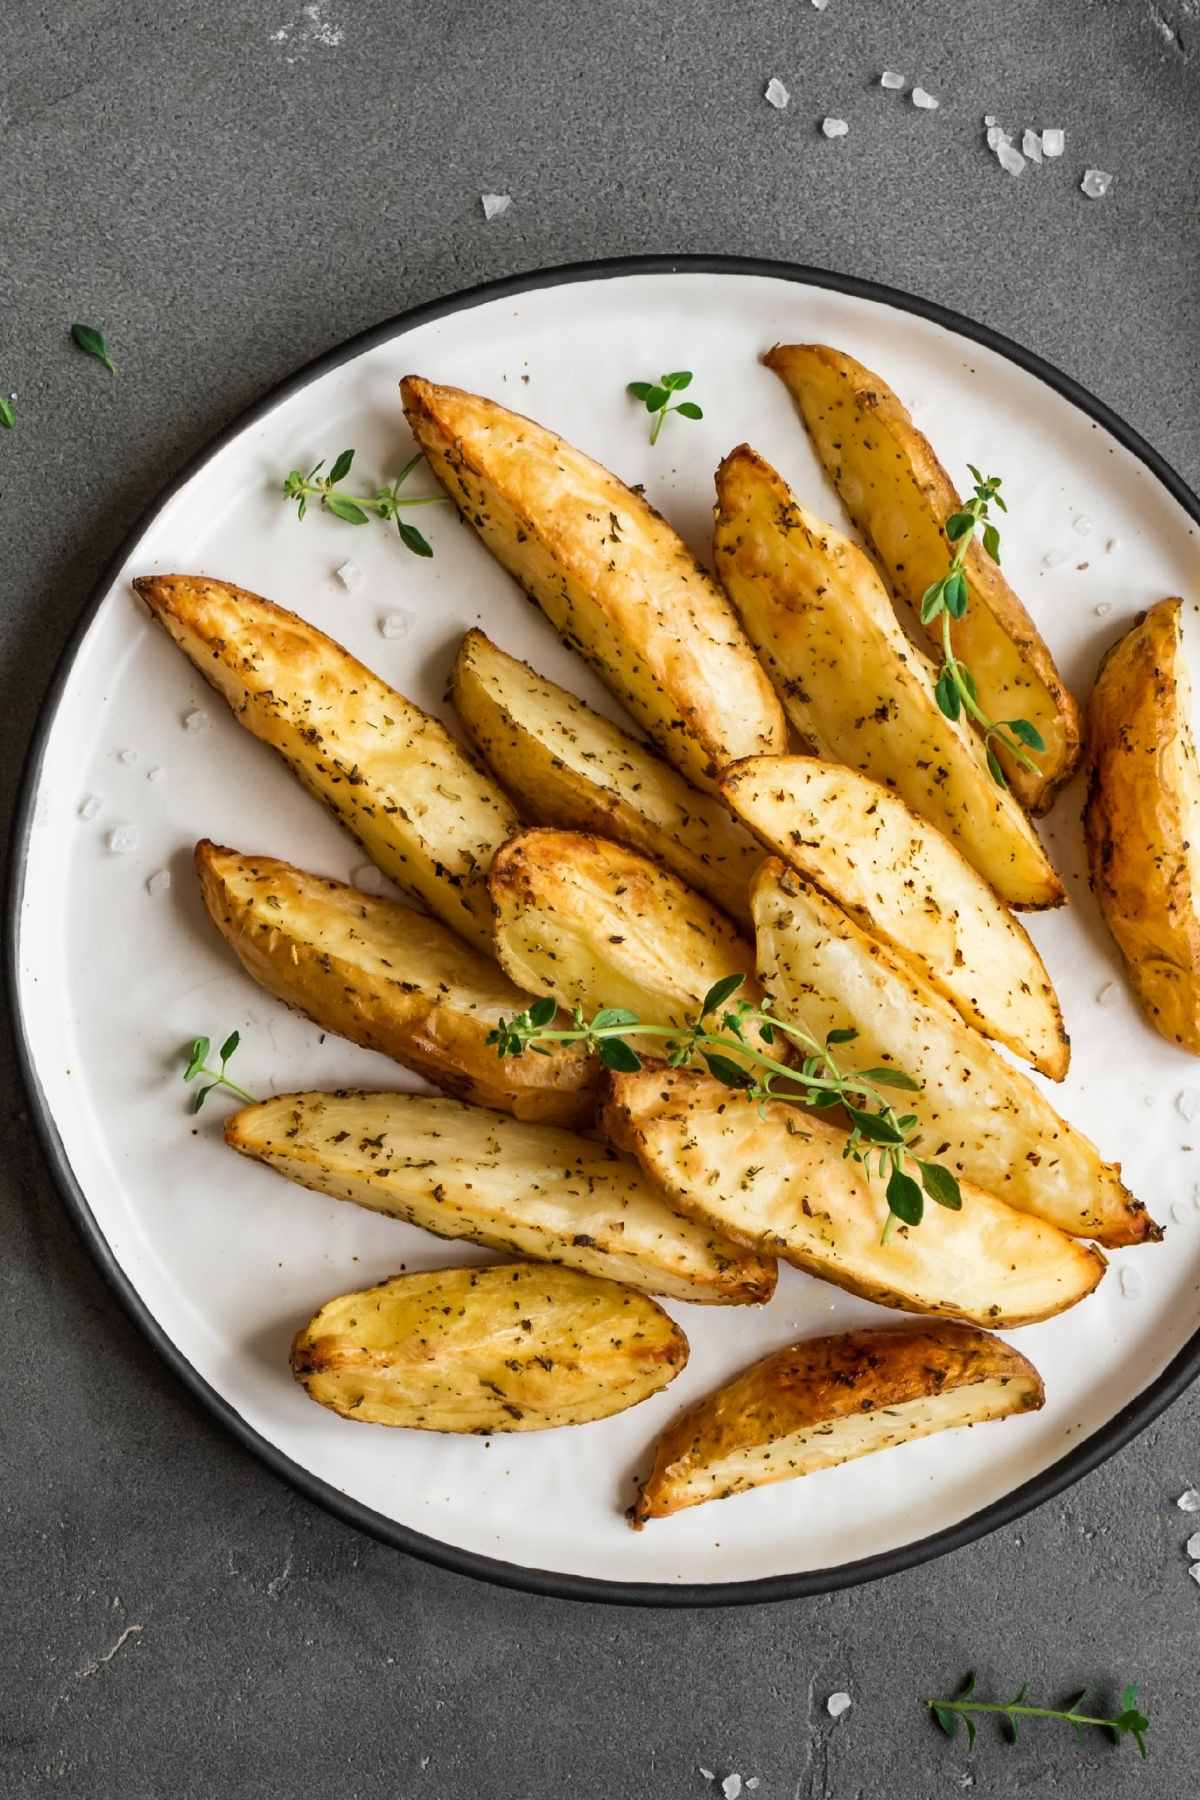 The perfect potato wedges are soft and tender on the inside and crisped to perfection on the outside. Throw in some crunchy garlic and fresh Parmesan and you’ve got the tastiest potato wedges of all time. This recipe is easy to make and results in perfect potato wedges, without parboiling first.